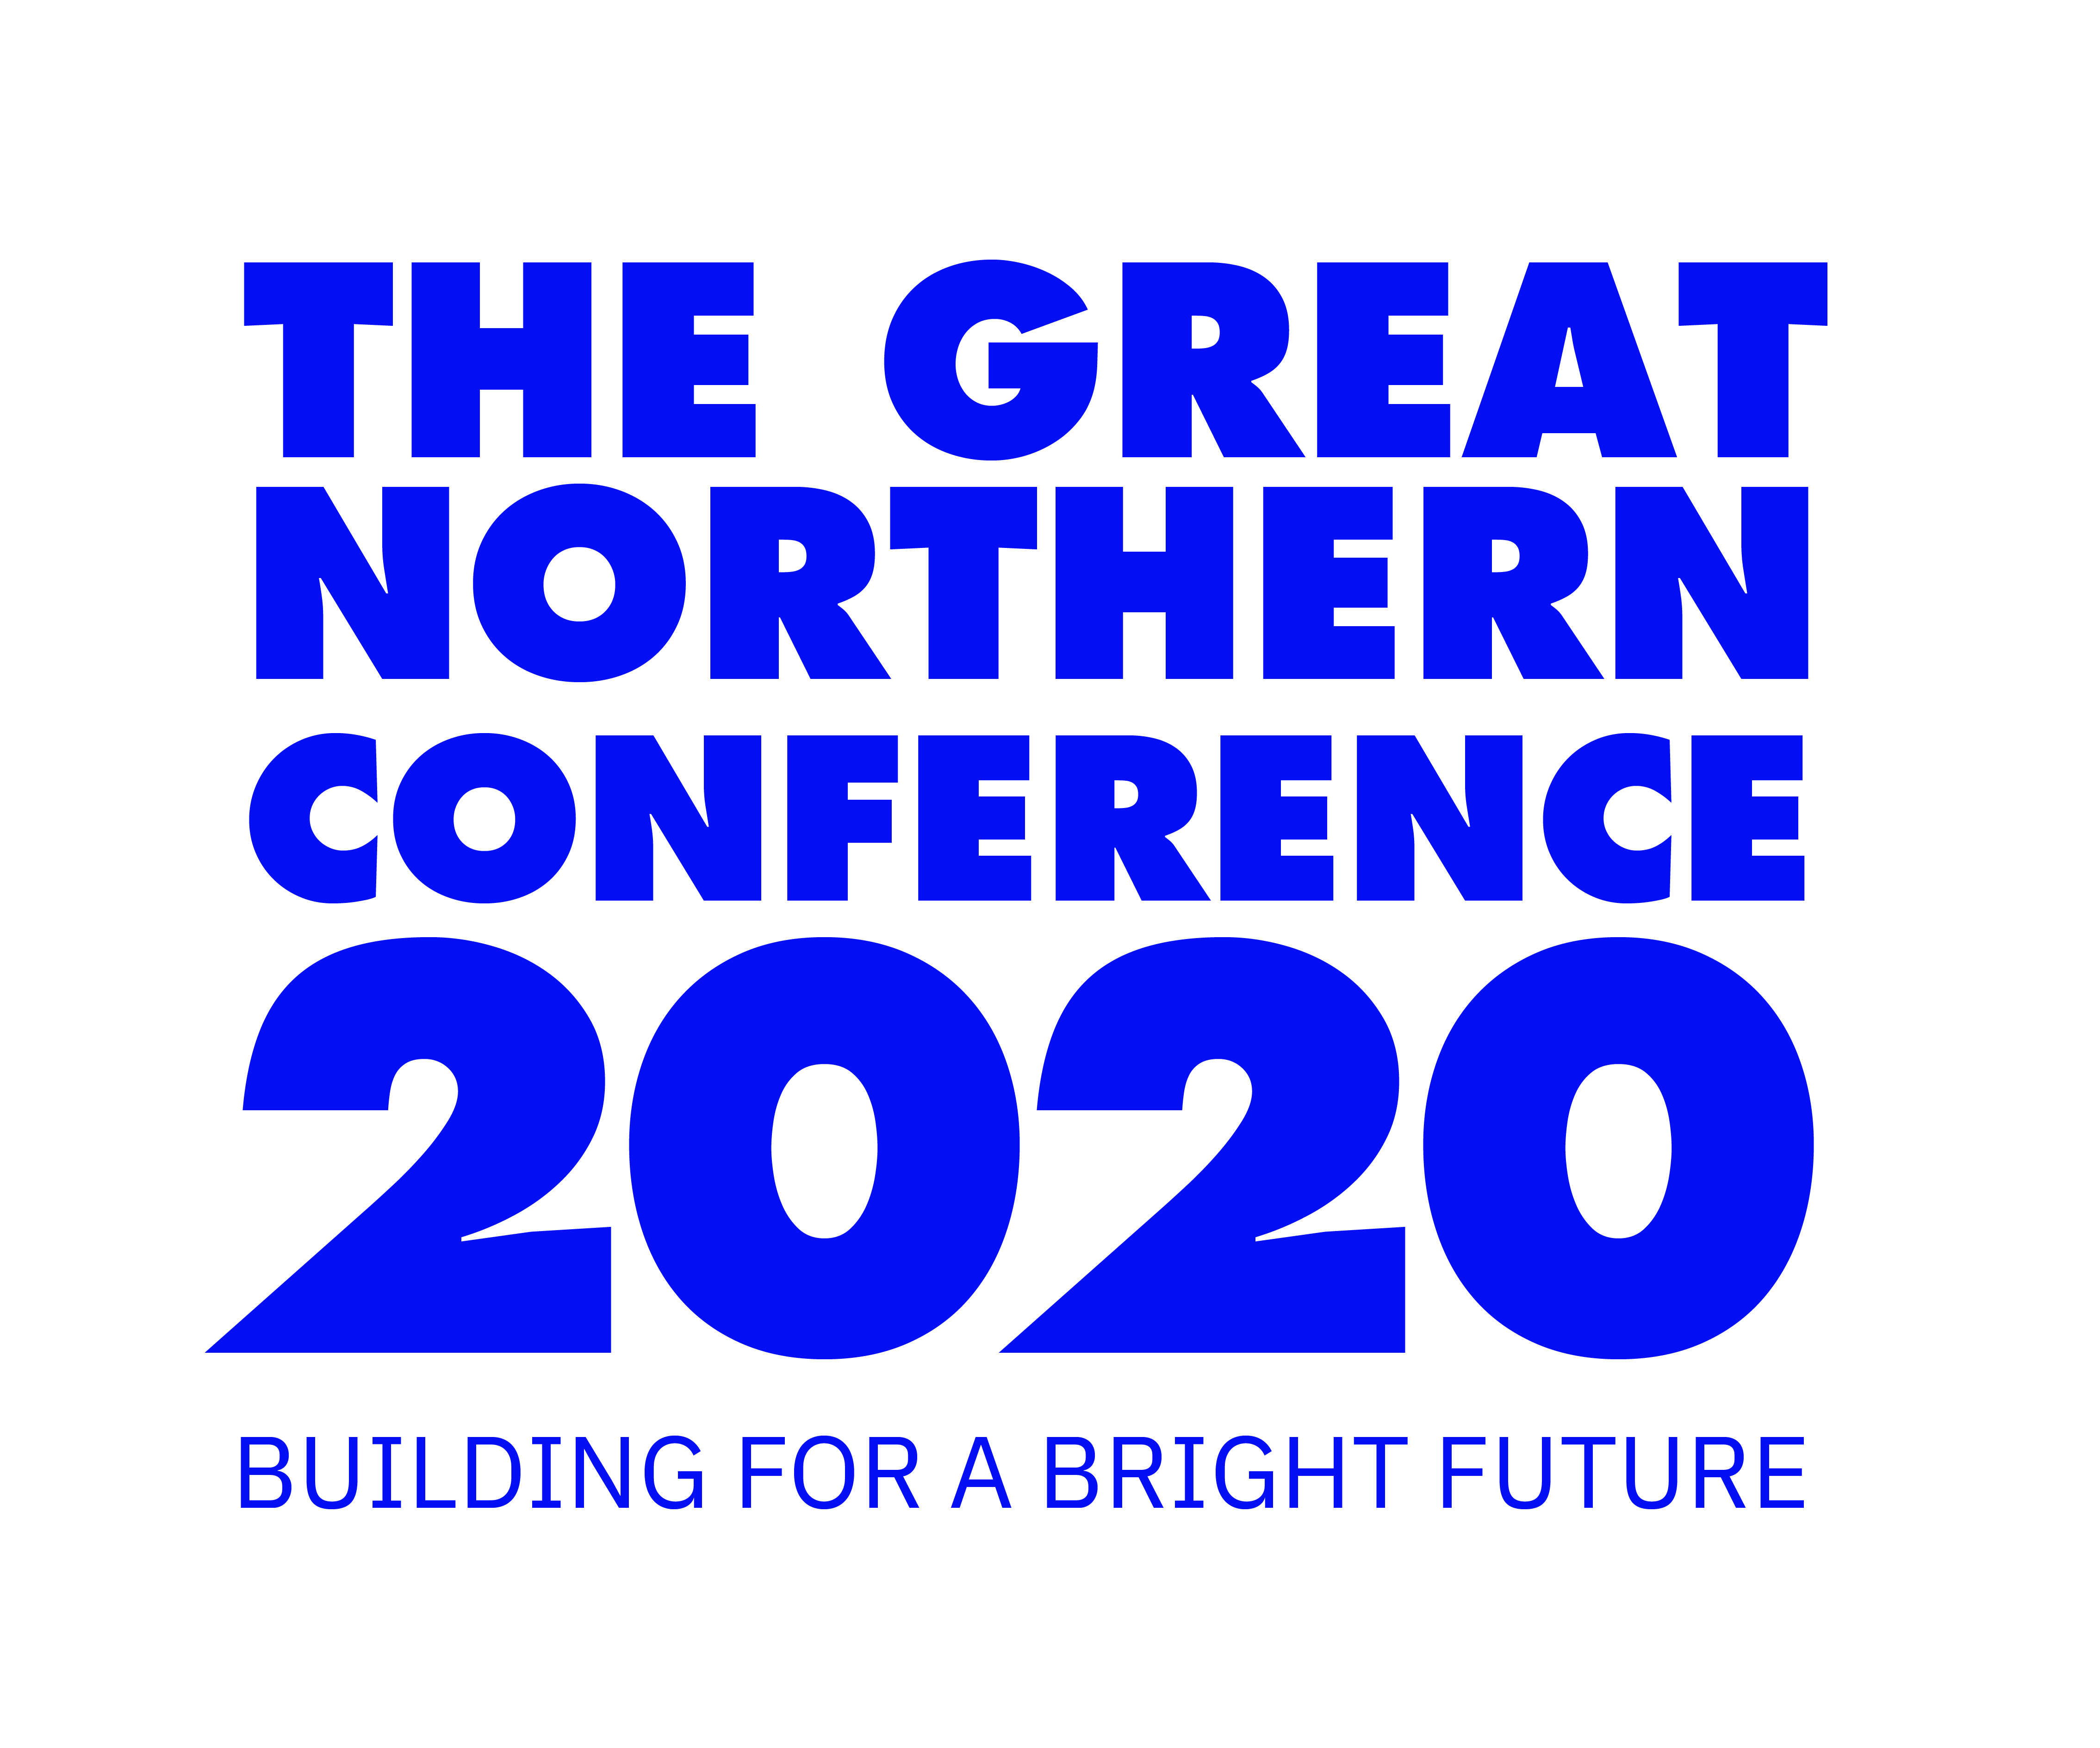 The Great Northern Conference 2020 Corporate Logo